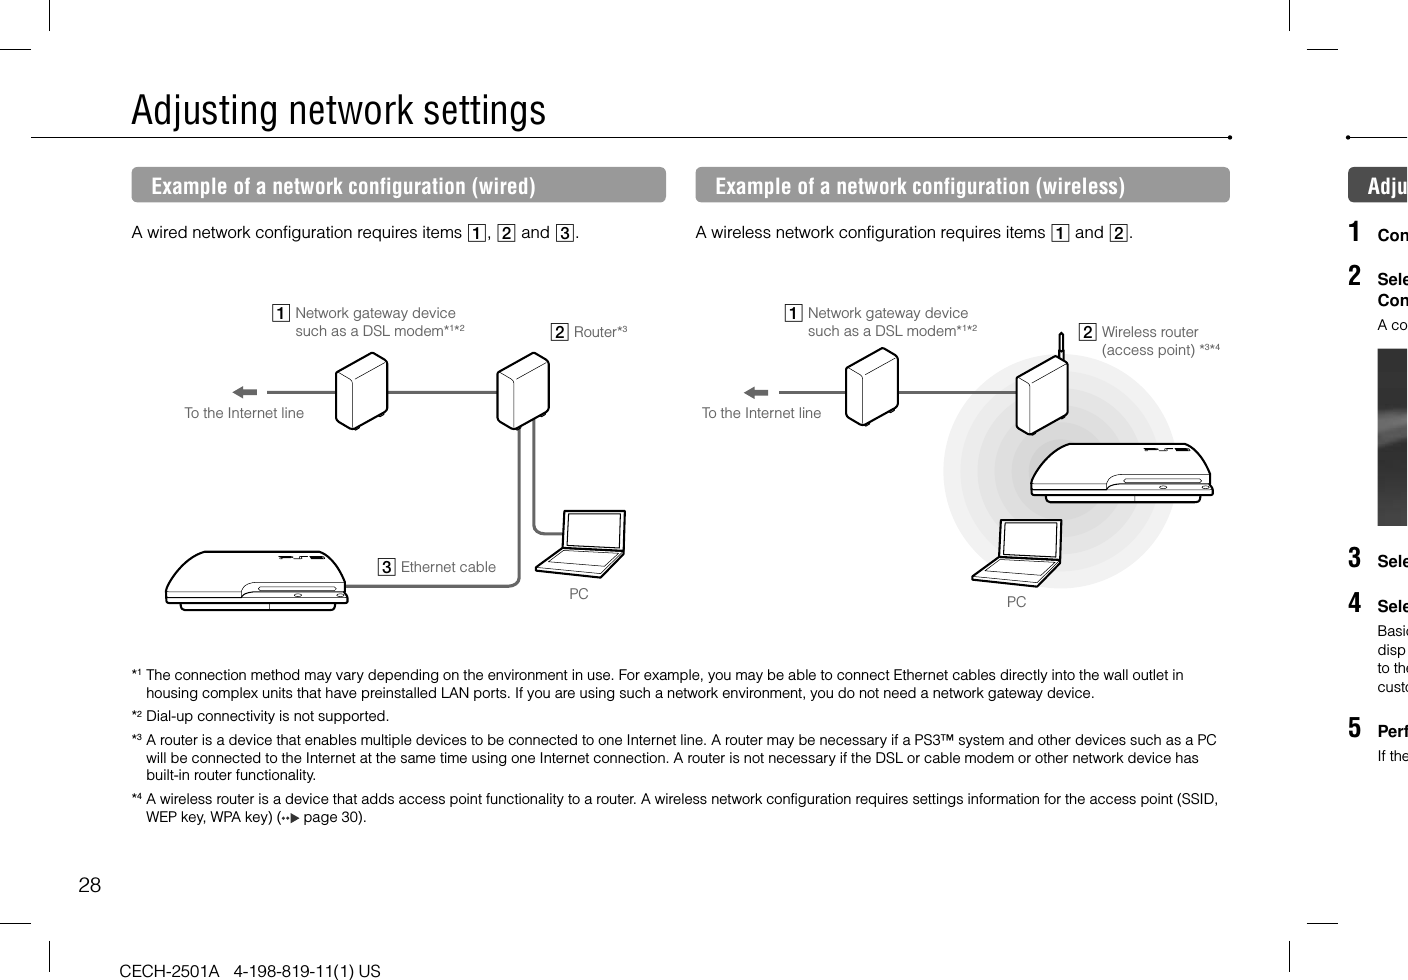 28CECH-2501A   4-198-819-11(1) USAdjusting network settingsExample of a network configuration (wired)A wired network configuration requires items ,  and .Example of a network configuration (wireless)A wireless network configuration requires items  and .*1 The connection method may vary depending on the environment in use. For example, you may be able to connect Ethernet cables directly into the wall outlet in housing complex units that have preinstalled LAN ports. If you are using such a network environment, you do not need a network gateway device. *2 Dial-up connectivity is not supported.*3 A router is a device that enables multiple devices to be connected to one Internet line. A router may be necessary if a PS3™ system and other devices such as a PC will be connected to the Internet at the same time using one Internet connection. A router is not necessary if the DSL or cable modem or other network device has built-in router functionality.*4 A wireless router is a device that adds access point functionality to a router. A wireless network configuration requires settings information for the access point (SSID, WEP key, WPA key) (  page 30).To the Internet line  Network gateway device such as a DSL modem*1*2  Wireless router (access point) *3*4PCTo the Internet line  Network gateway device such as a DSL modem*1*2 Router*3PC Ethernet cableAdju1  Con2  SeleConA co3  Sele4  SeleBasicdispto thecusto5  PerfIf the